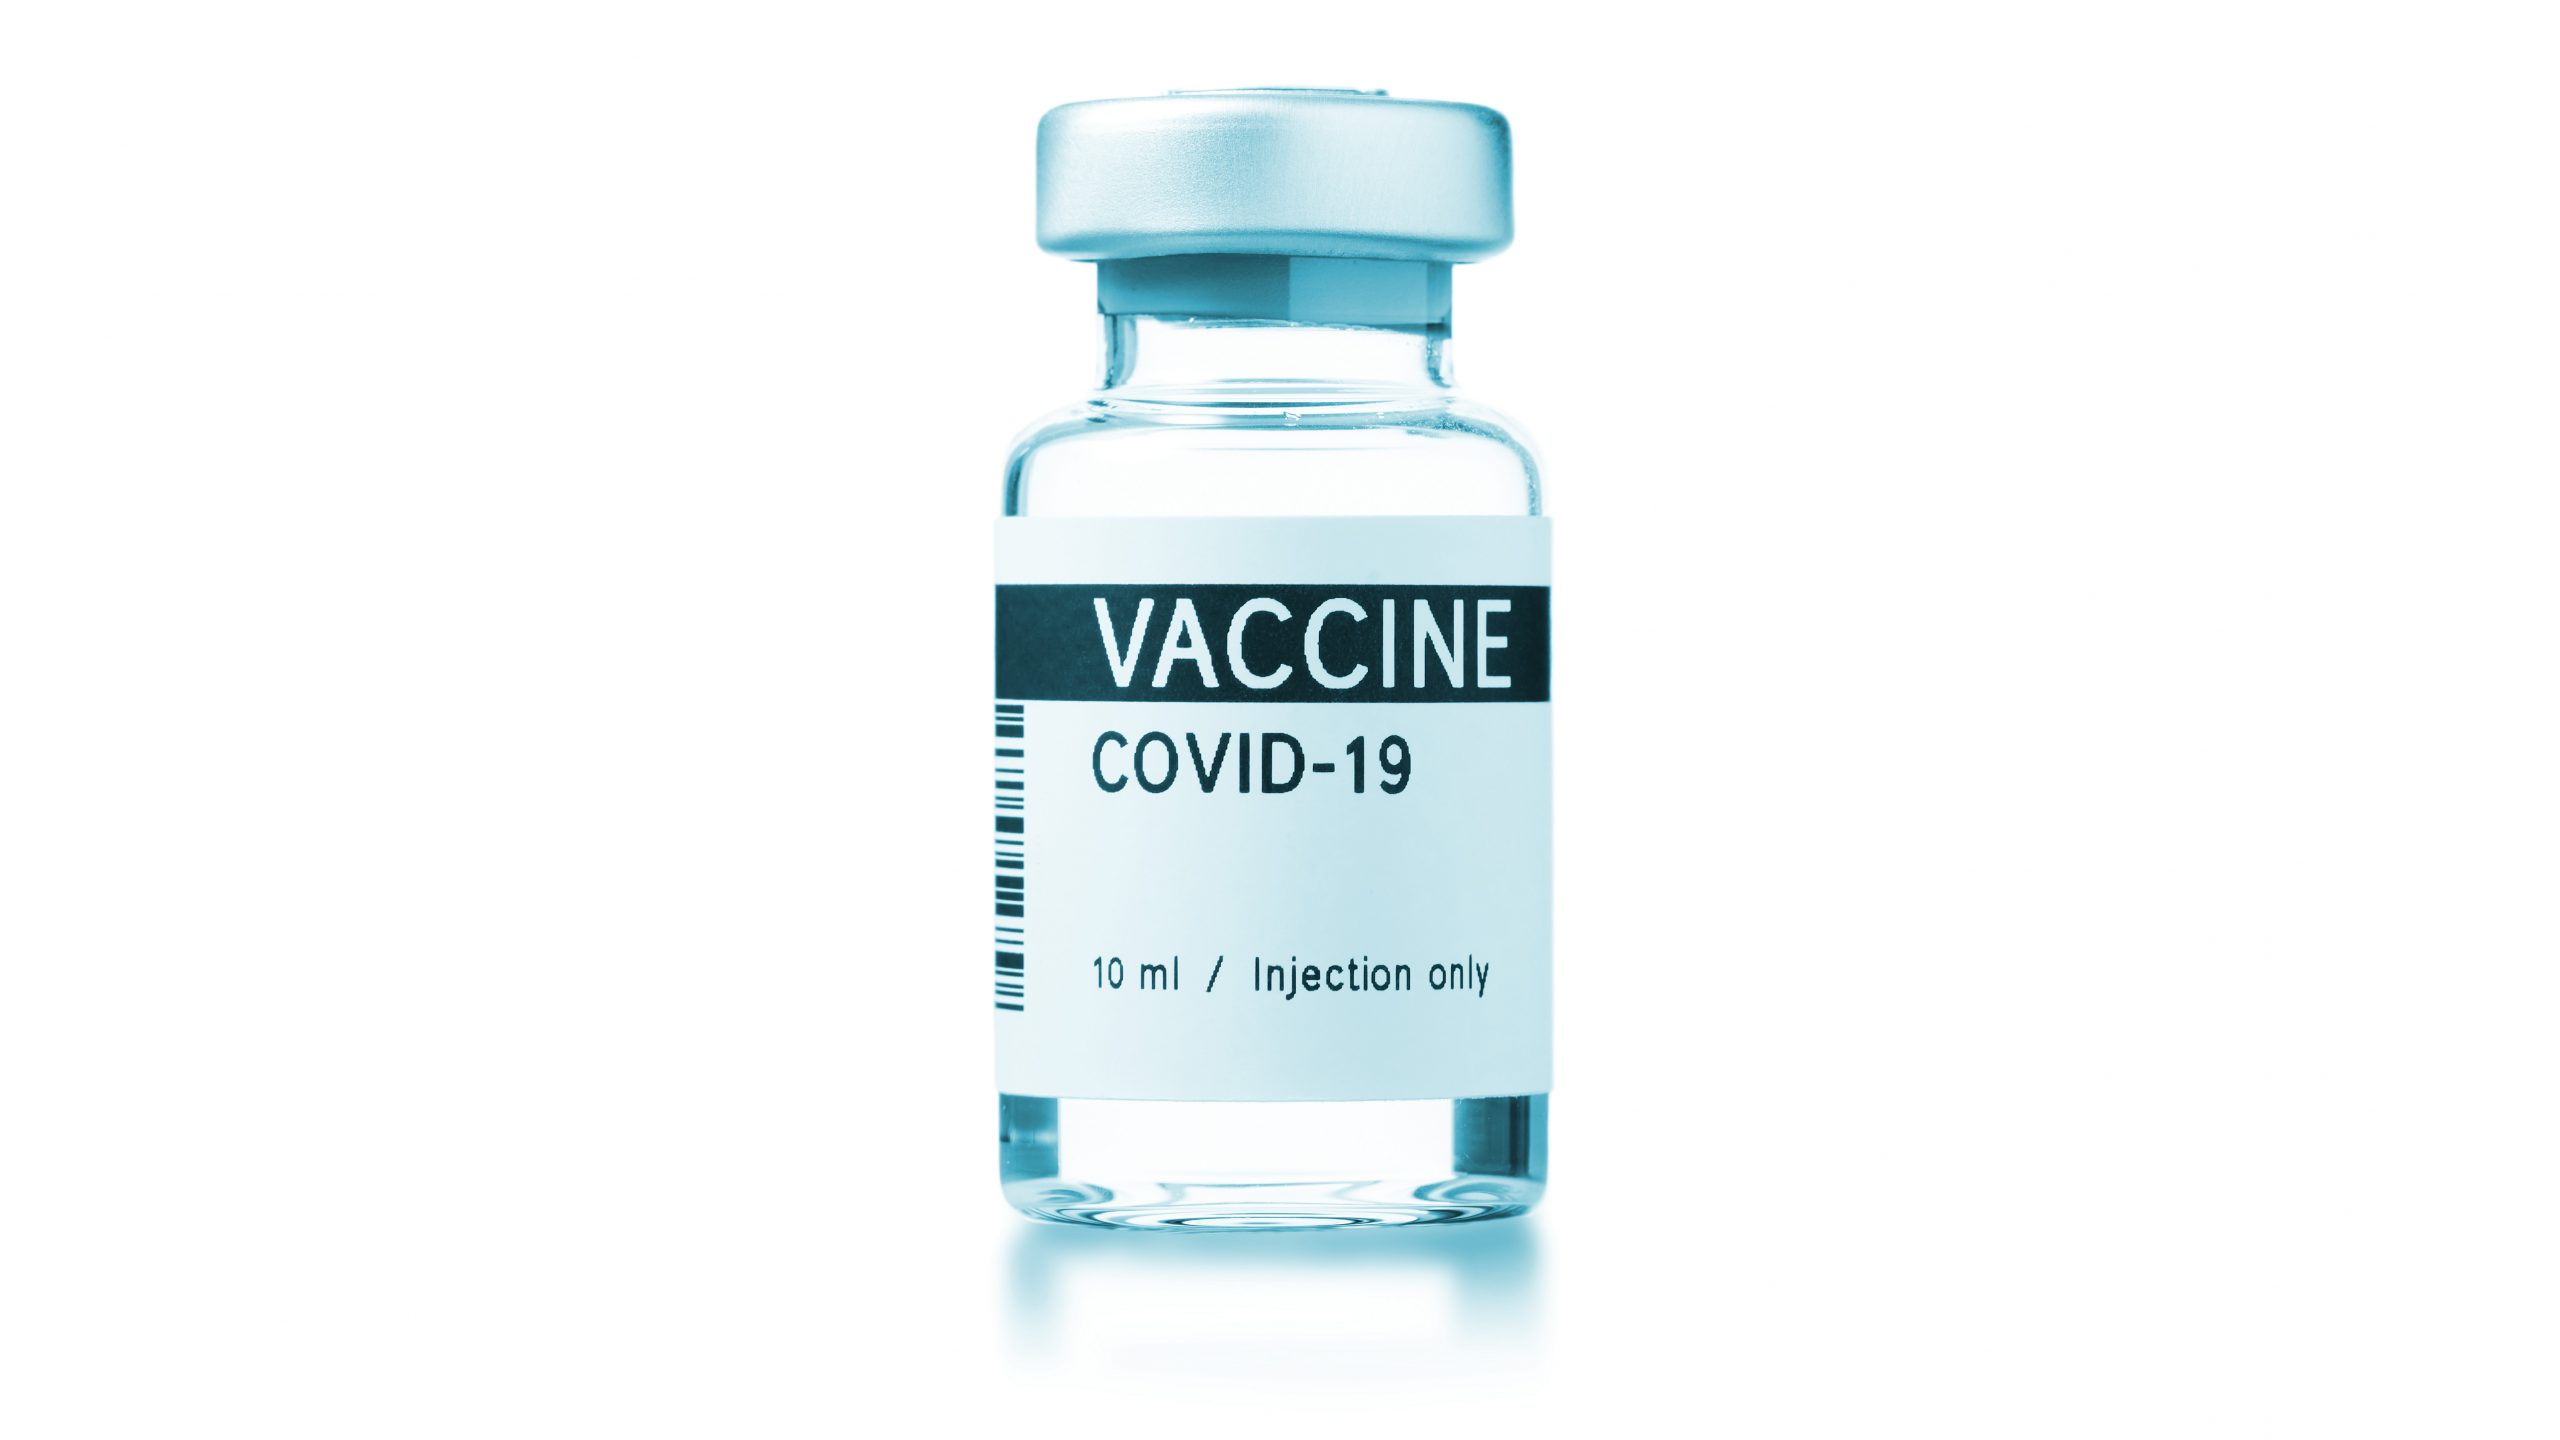 COVID-19 VACCINE ampoule isolated on a white background.